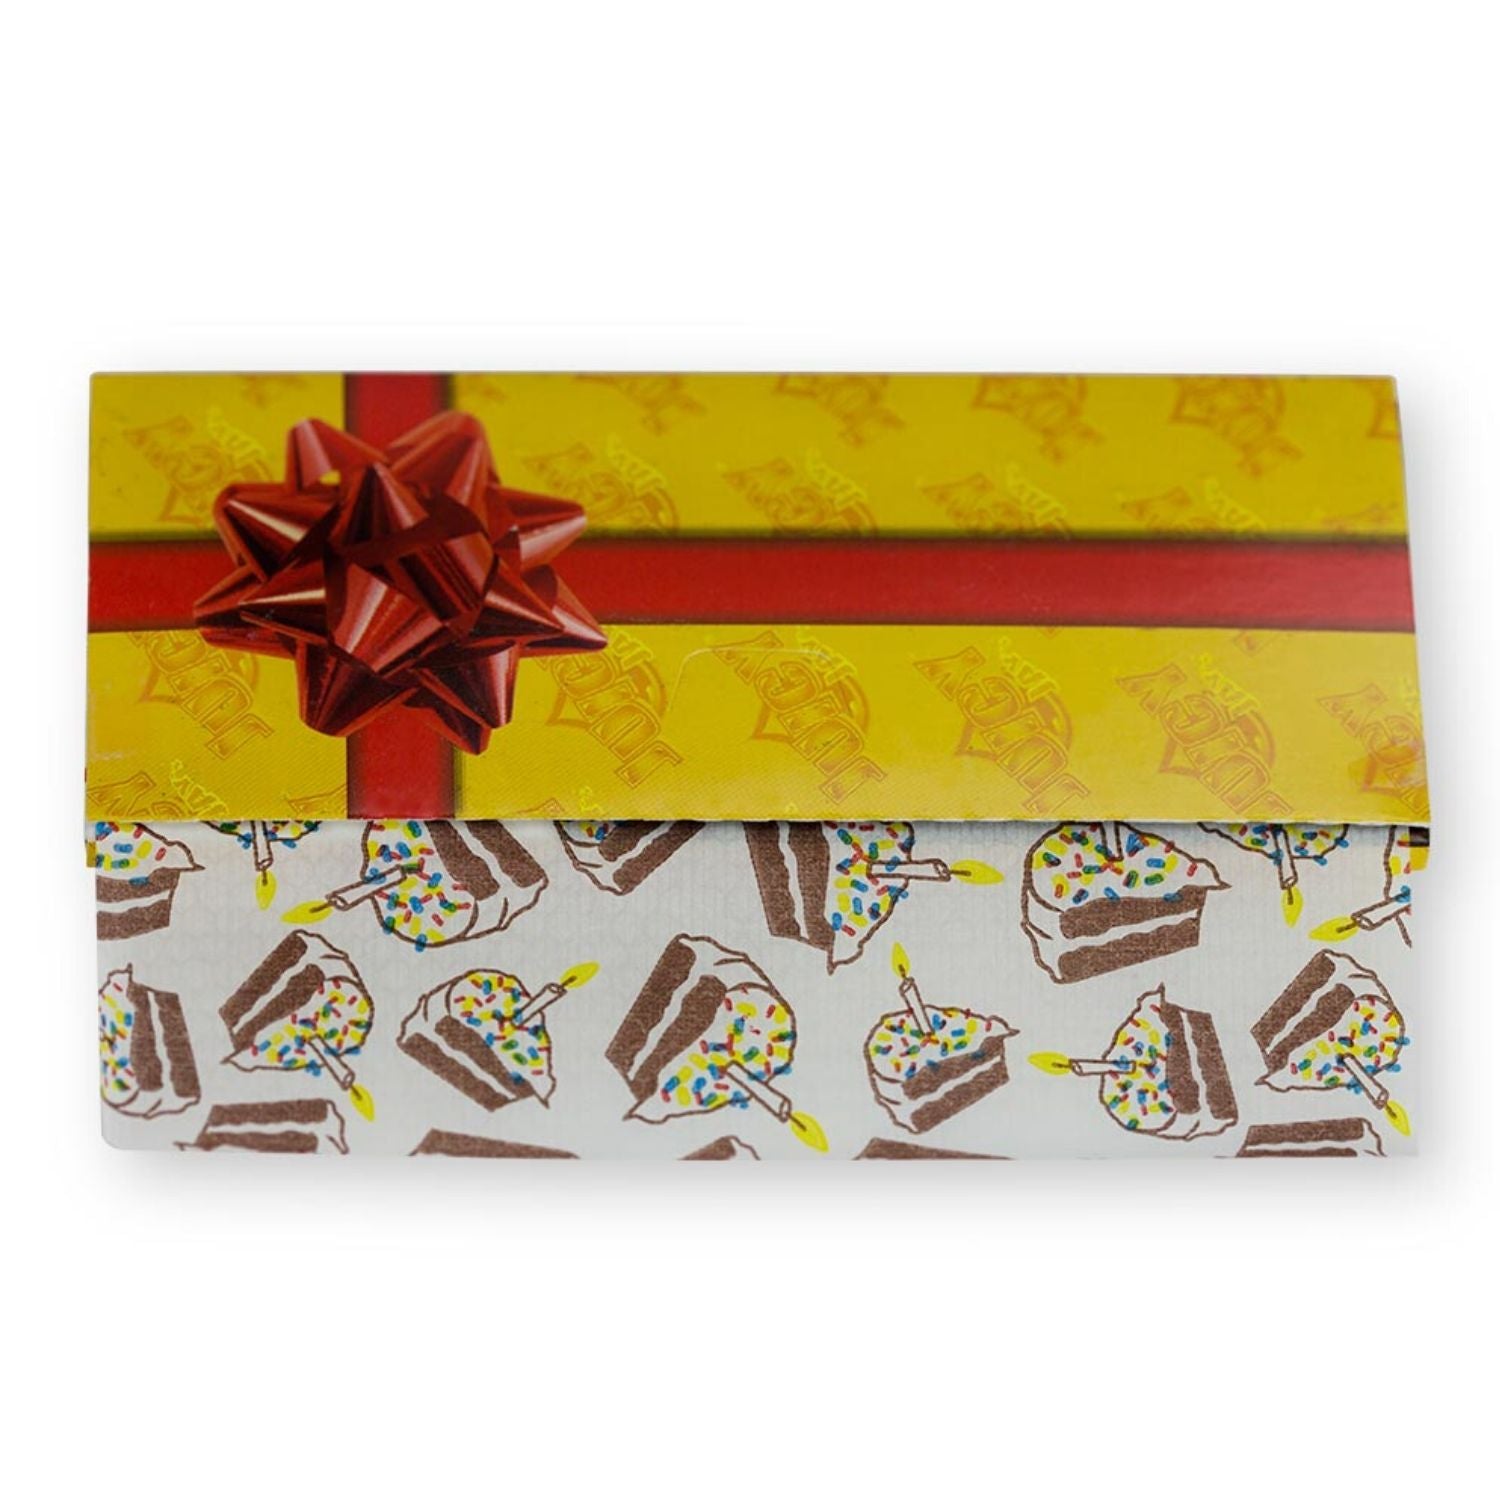 Juicy Jay Rolling Papers - Birthday Cake Flavor